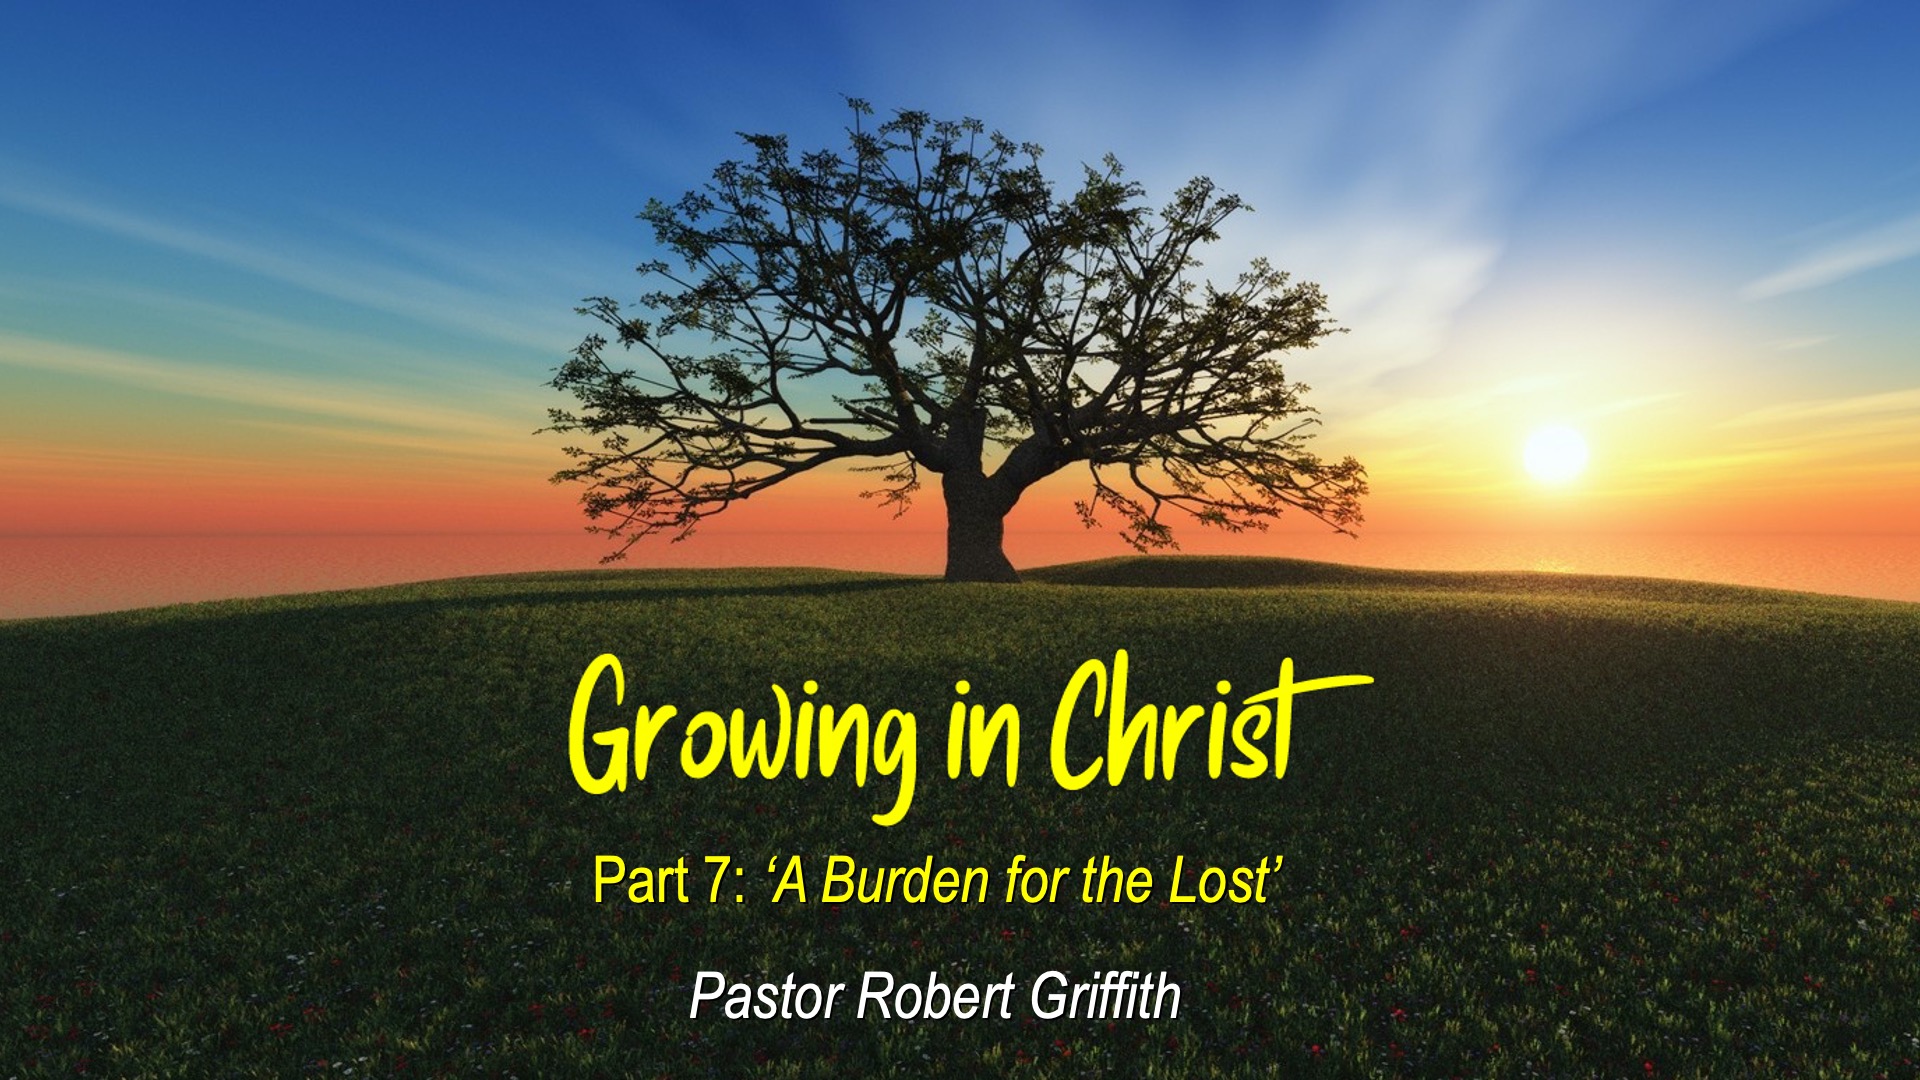 Growing in Christ (7)”A Burden for the Lost”